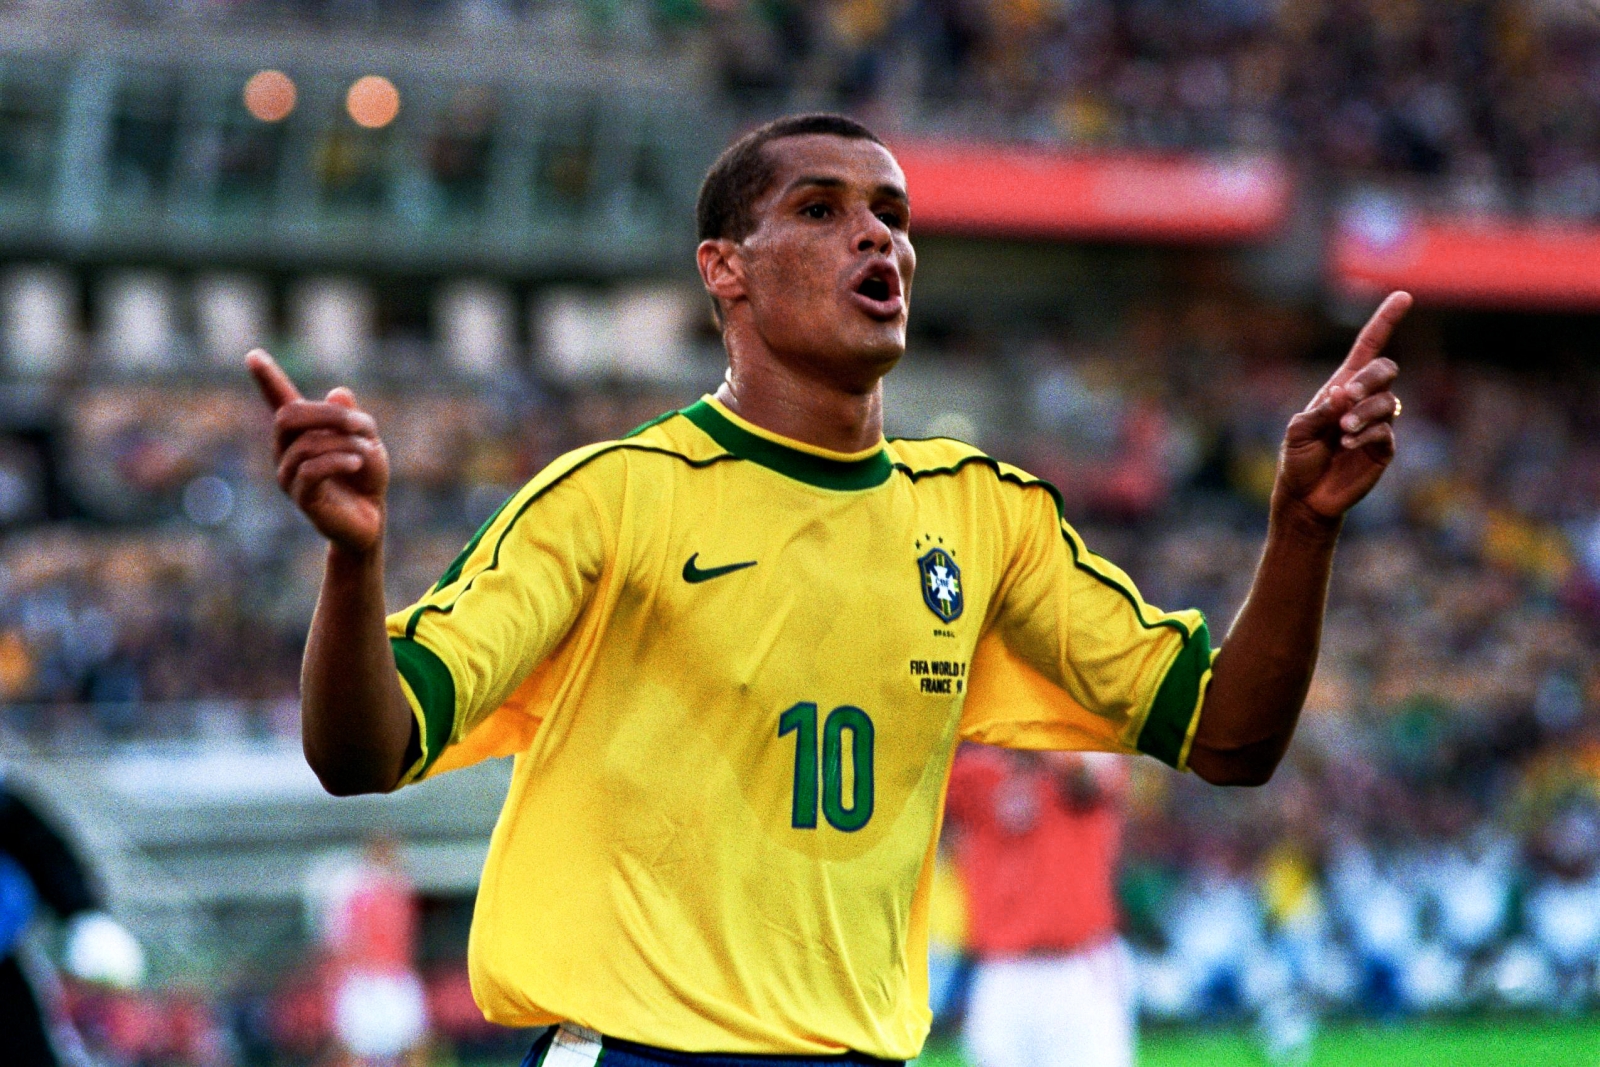 1. Rivaldo's iconic blonde hair look - wide 8